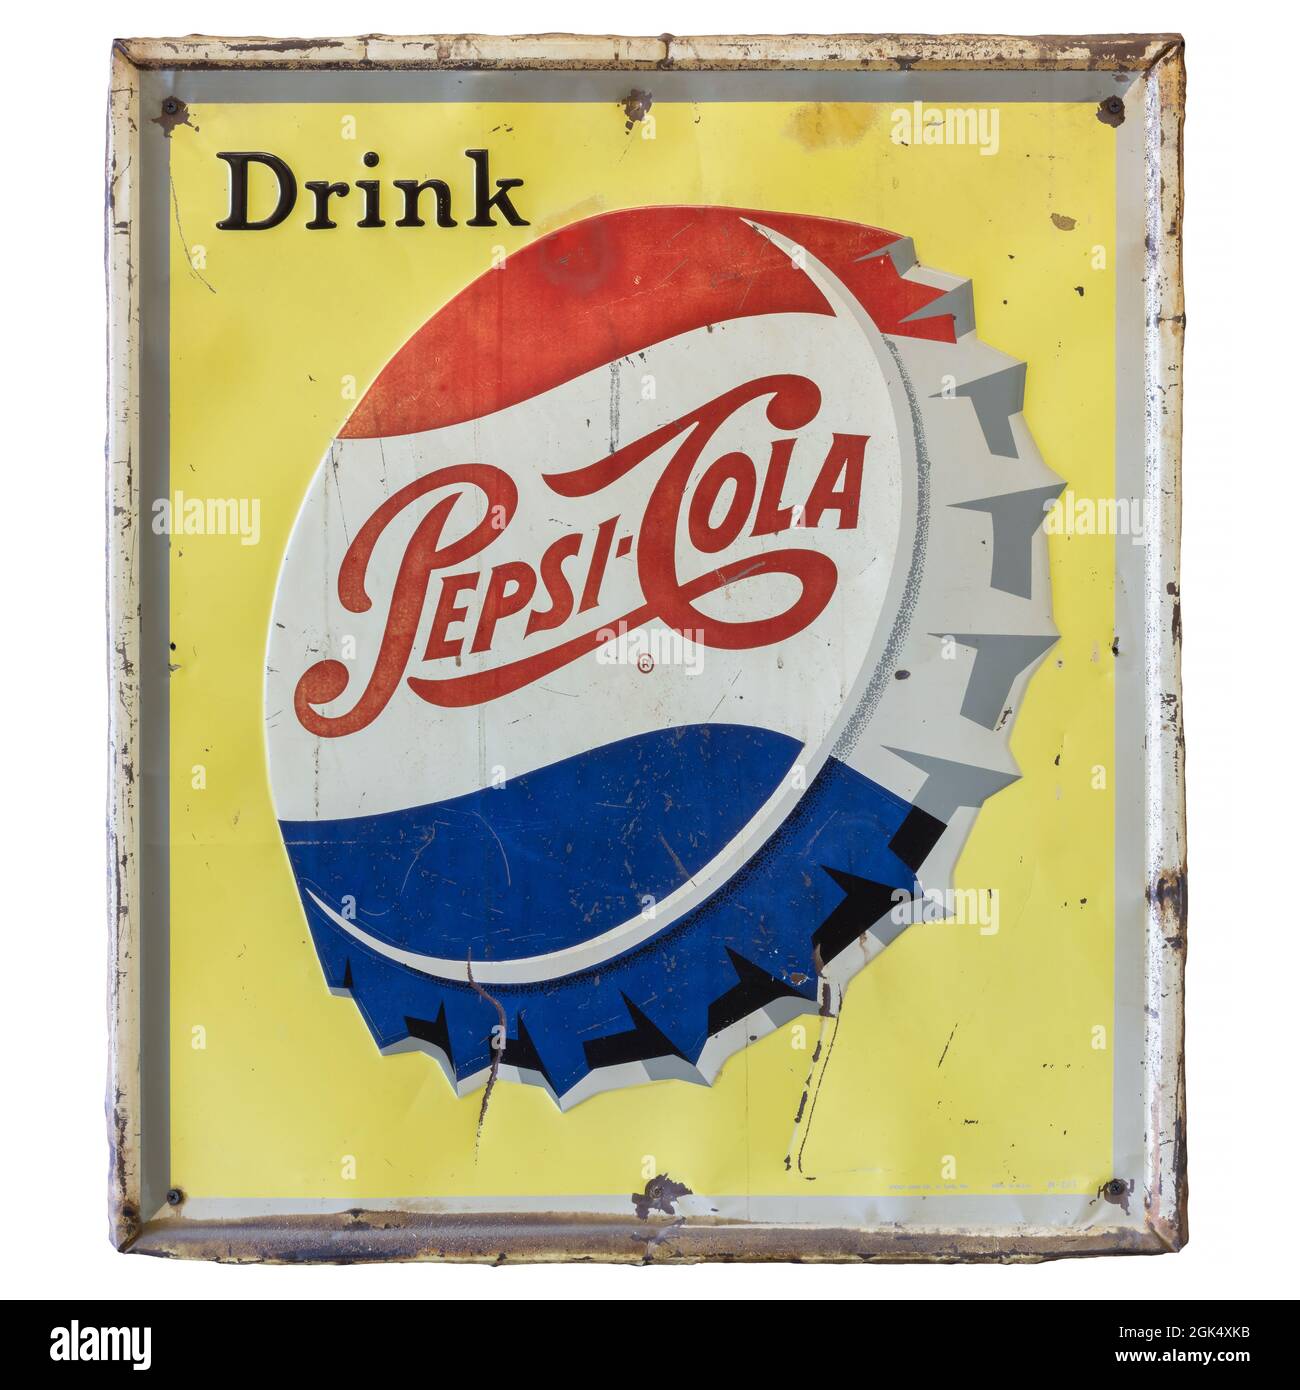 Dieren, The Netherlands - September 3, 2021: Authentic rusted and dented vintage Pepsi Cola advertisement made of steel in Dieren, The Netherlands Stock Photo